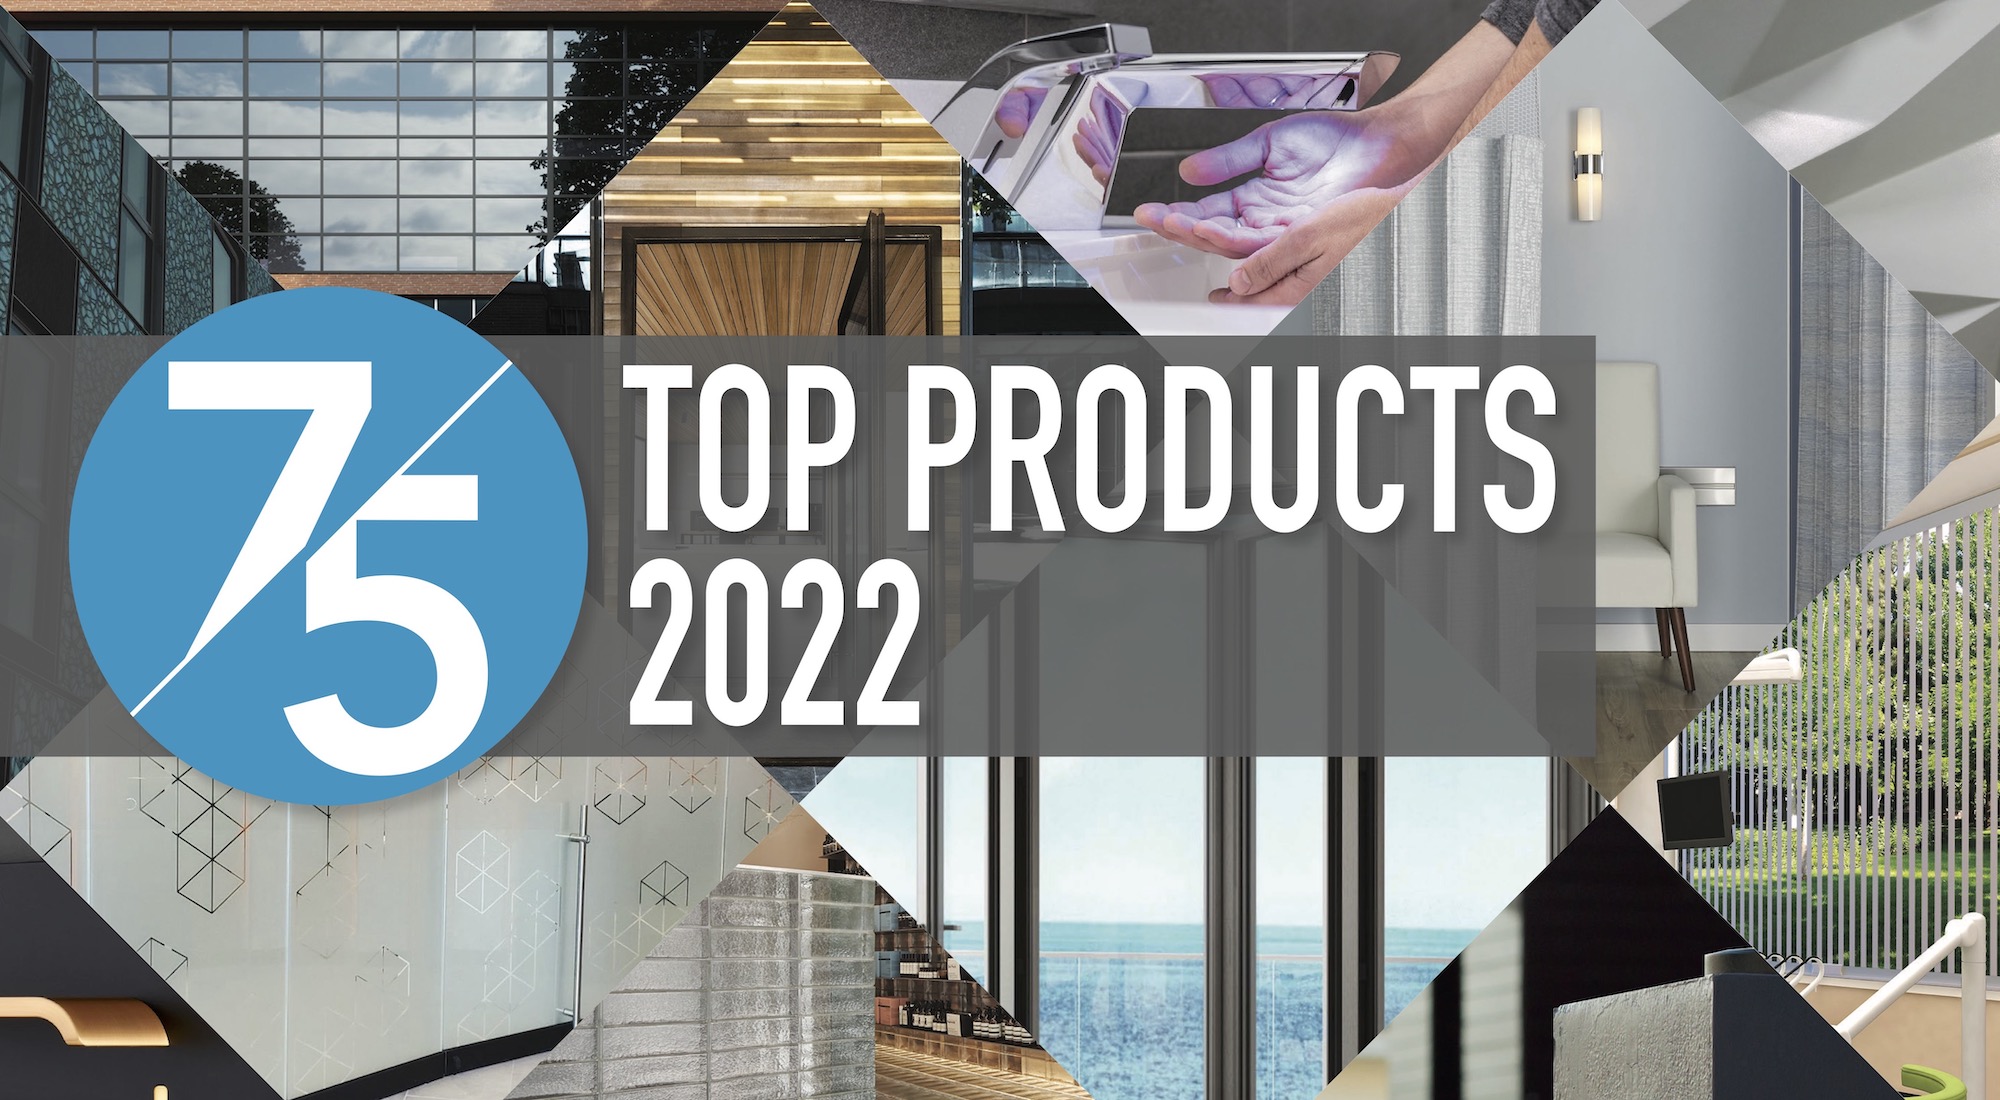 75 Top Products for 2022, Building Design and Construction